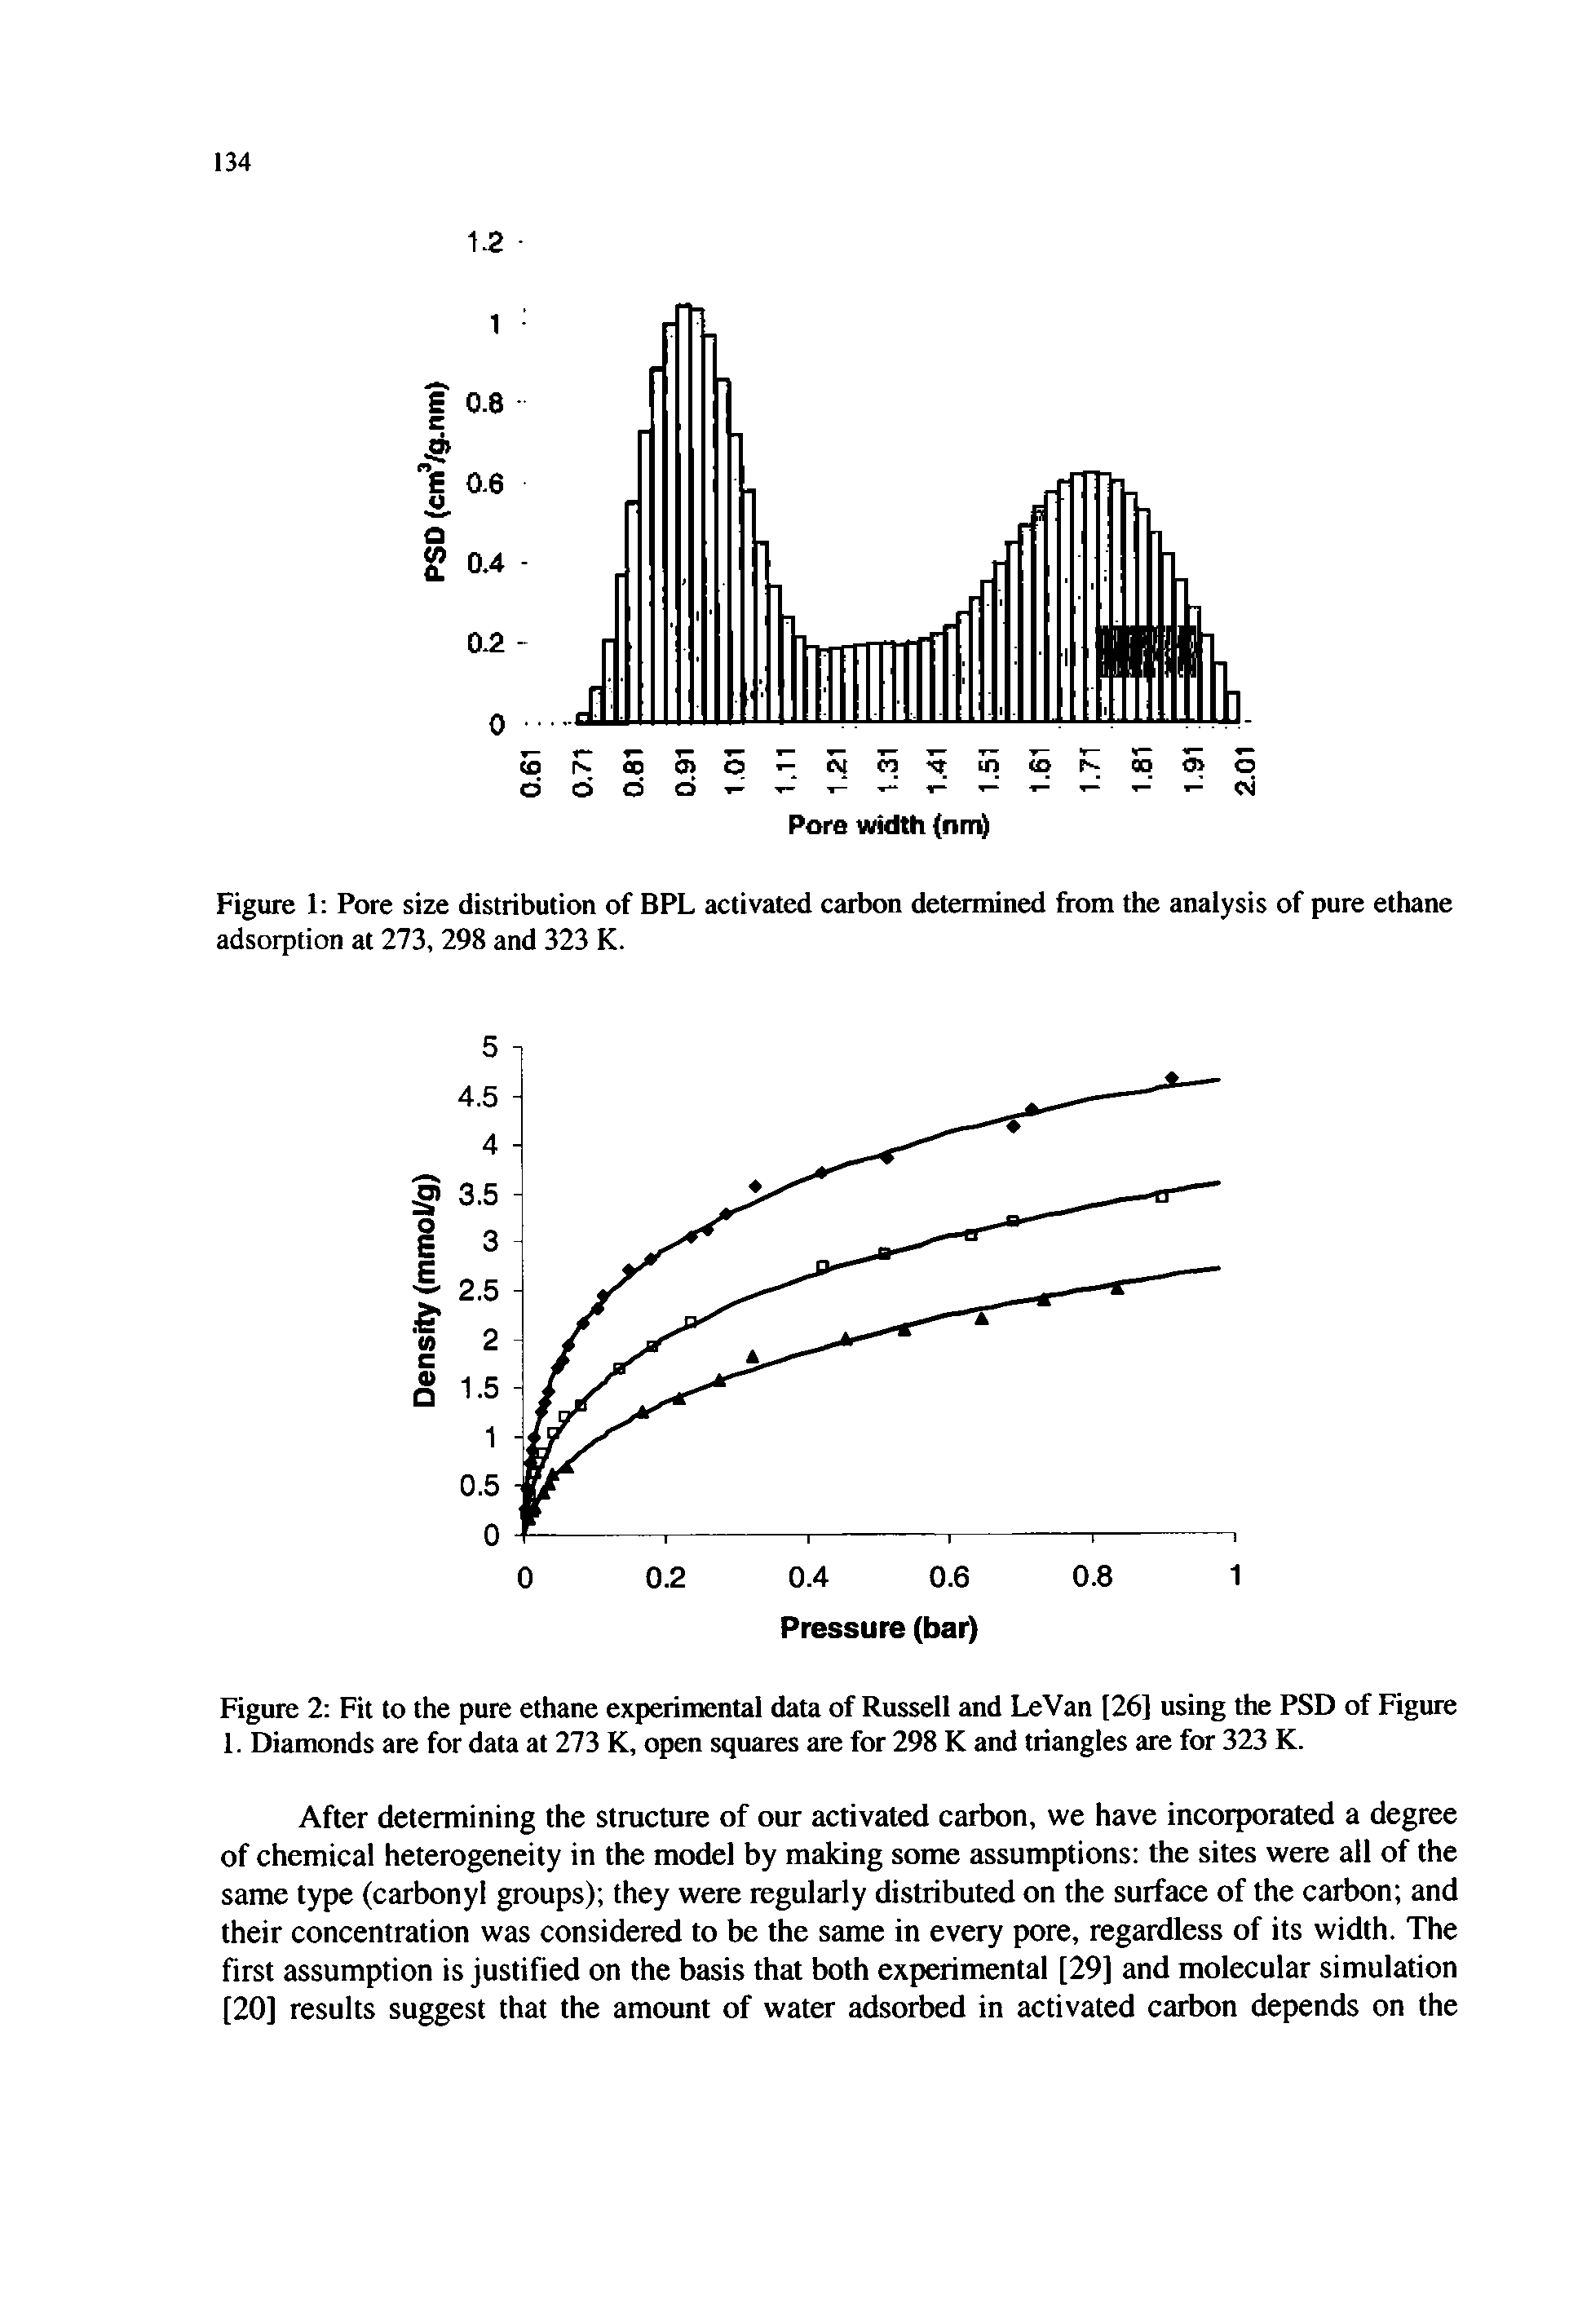 Figure 1 Pore size distribution of BPL activated carbon determined from the analysis of pure ethane adsorption at 273, 298 and 323 K.